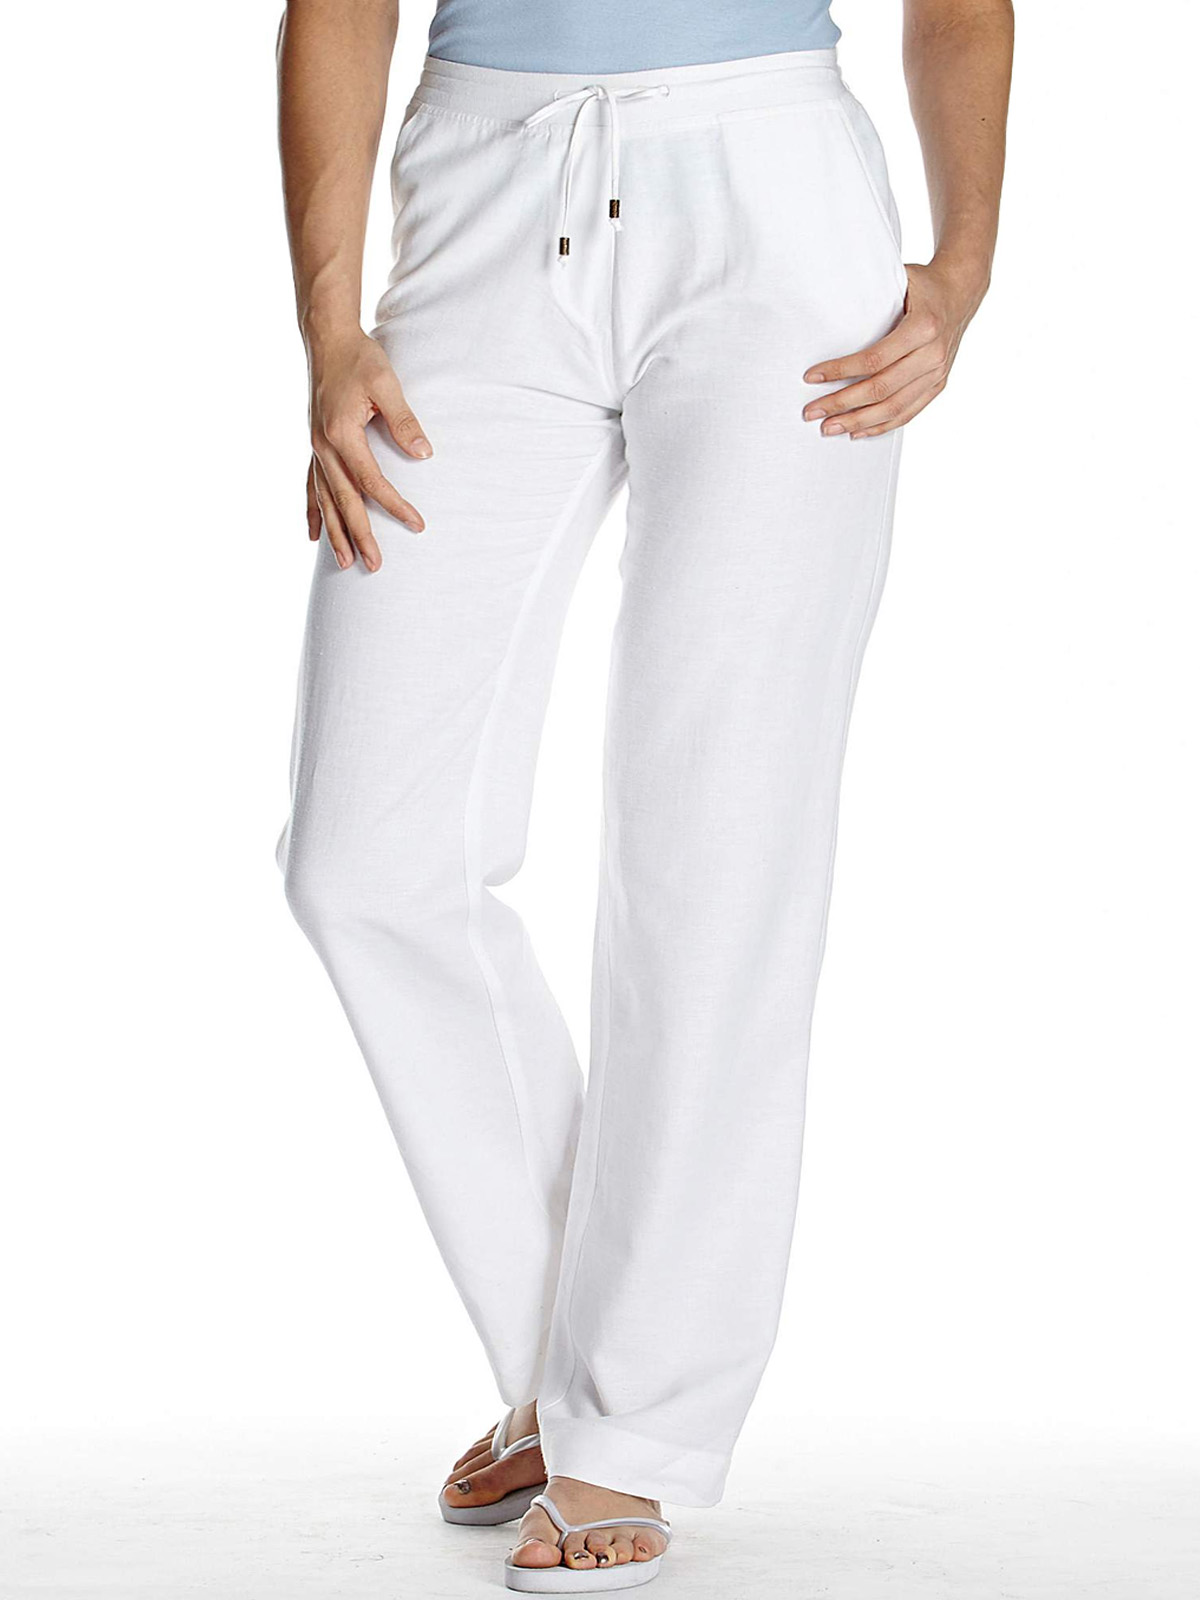 Label Be - - LabelBe WHITE Linen Blend Pull On Trousers - Plus Size 26 ...